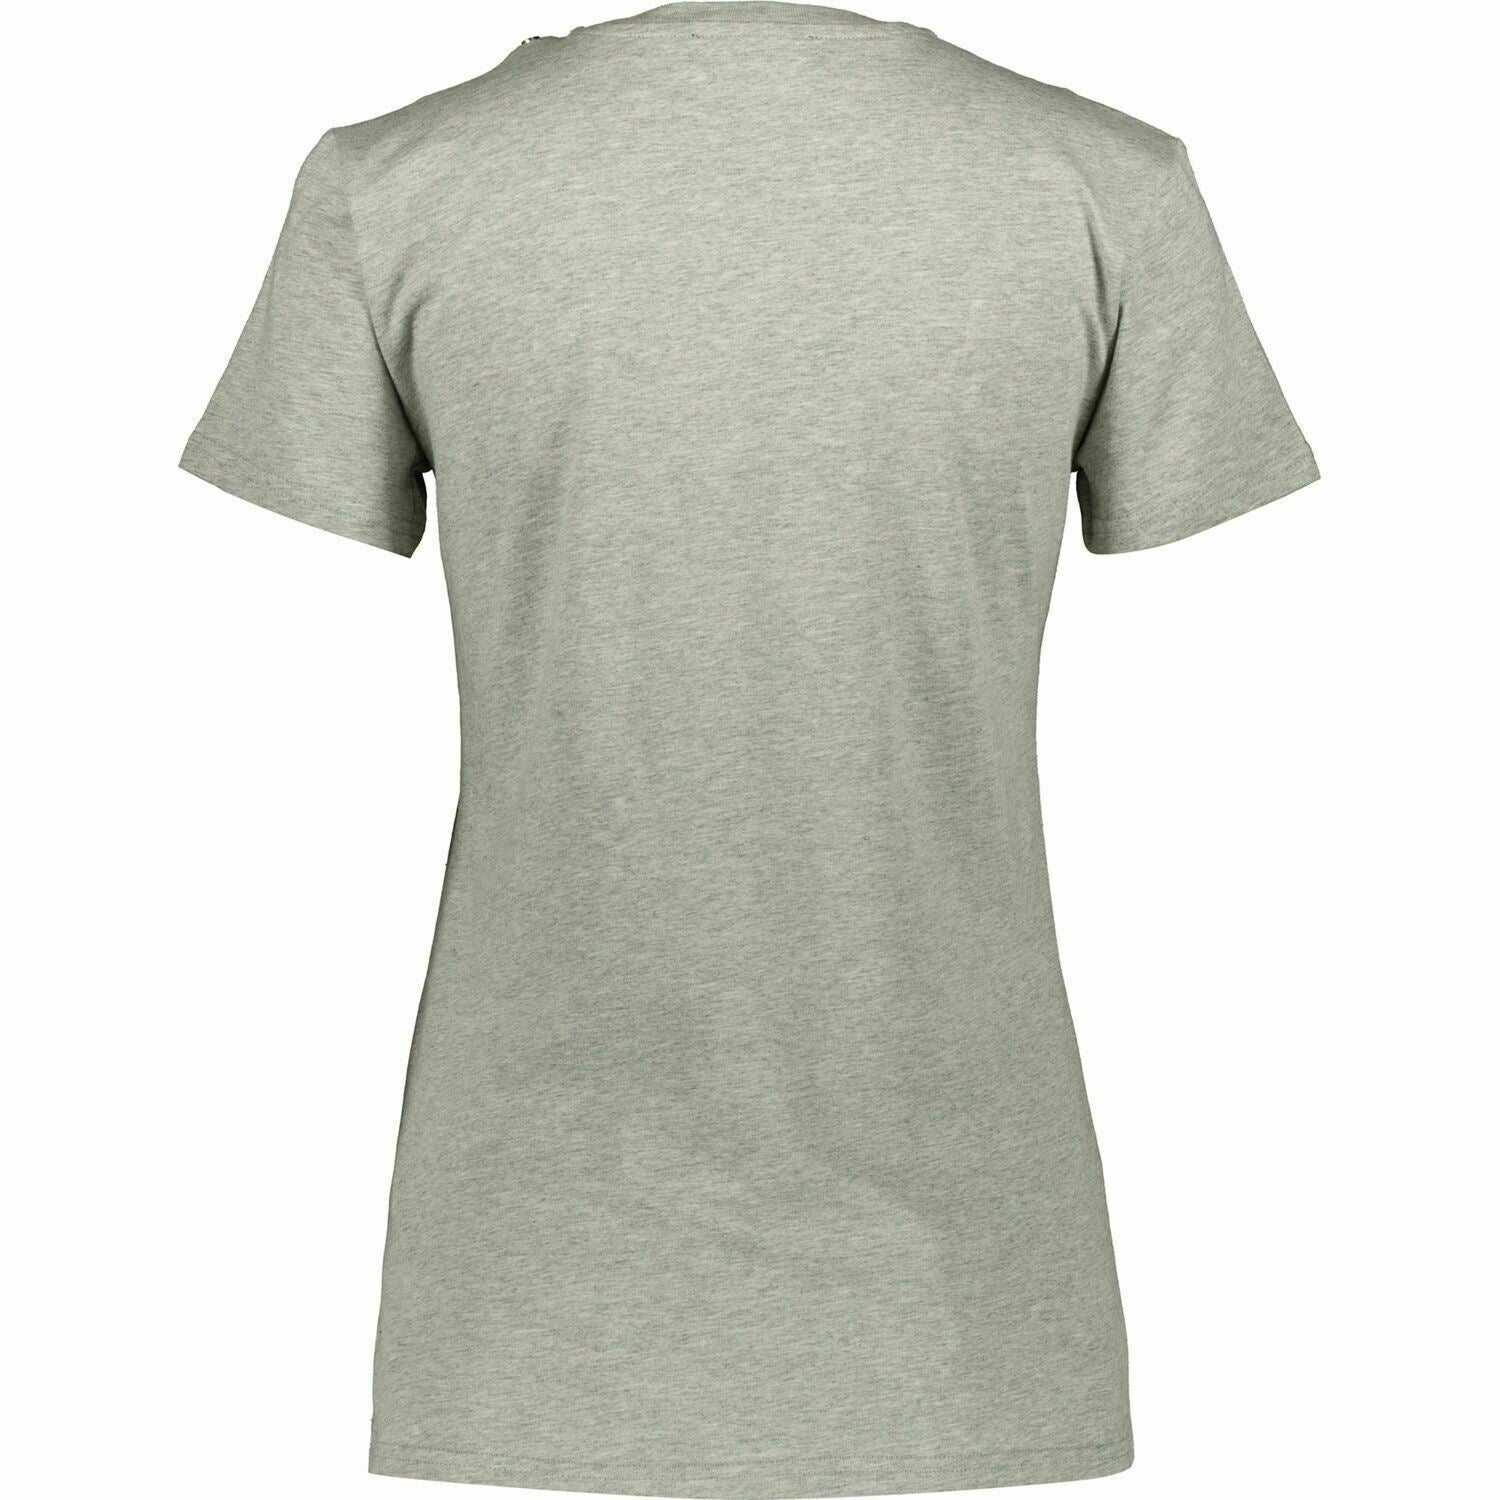 Genuine Diesel Womens Grey Marl T Sily T-Shirt Size Small